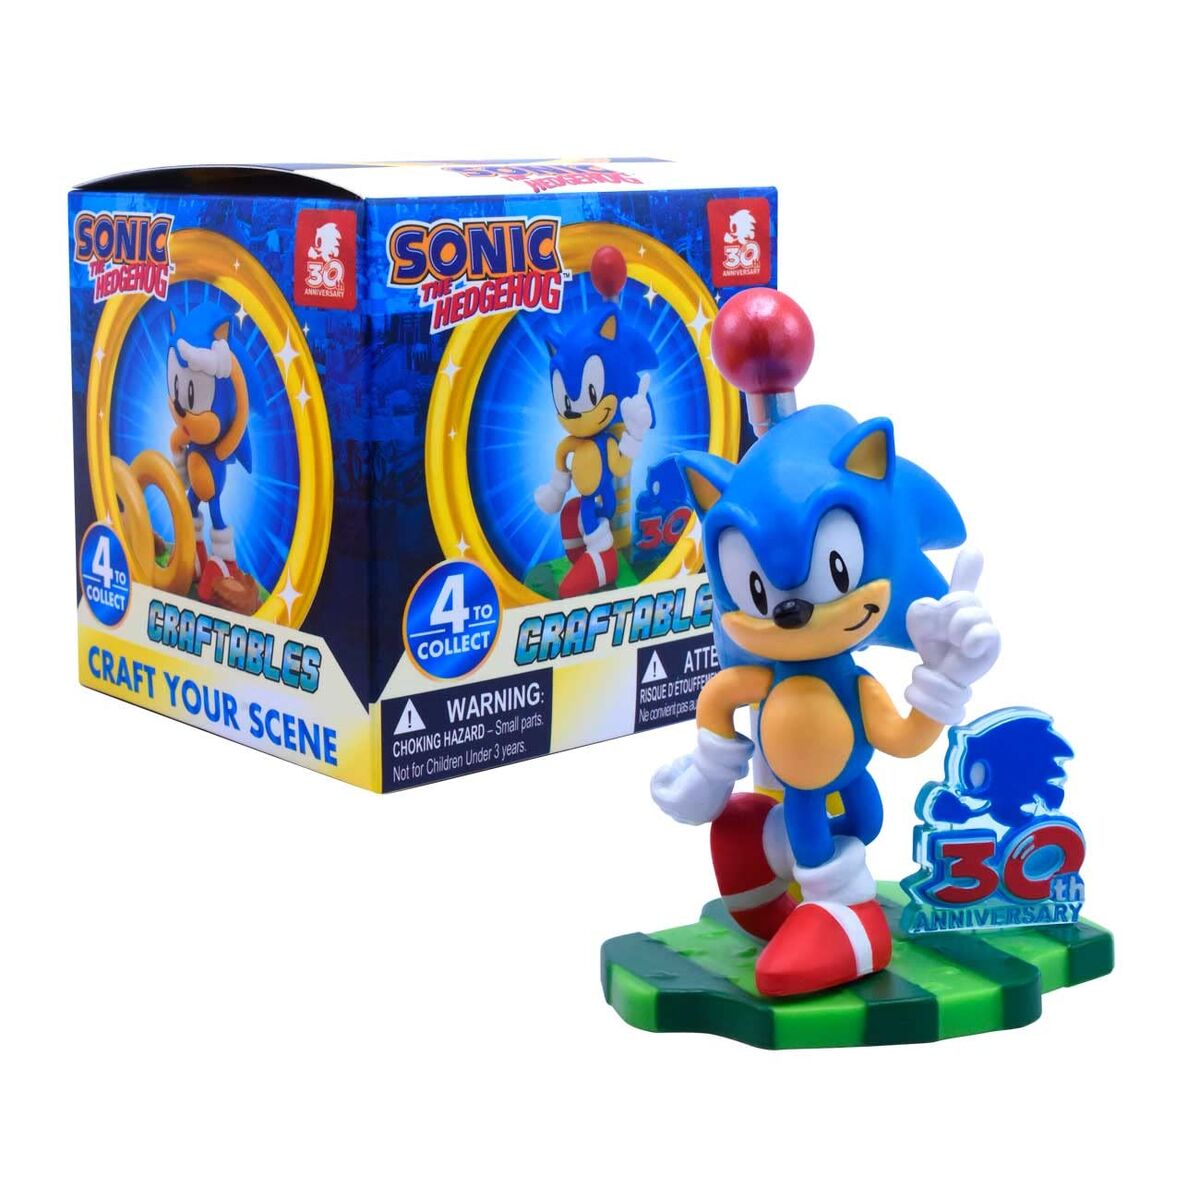 New shelves for sonic prime toys #sonicthehedgehog #sonic #new